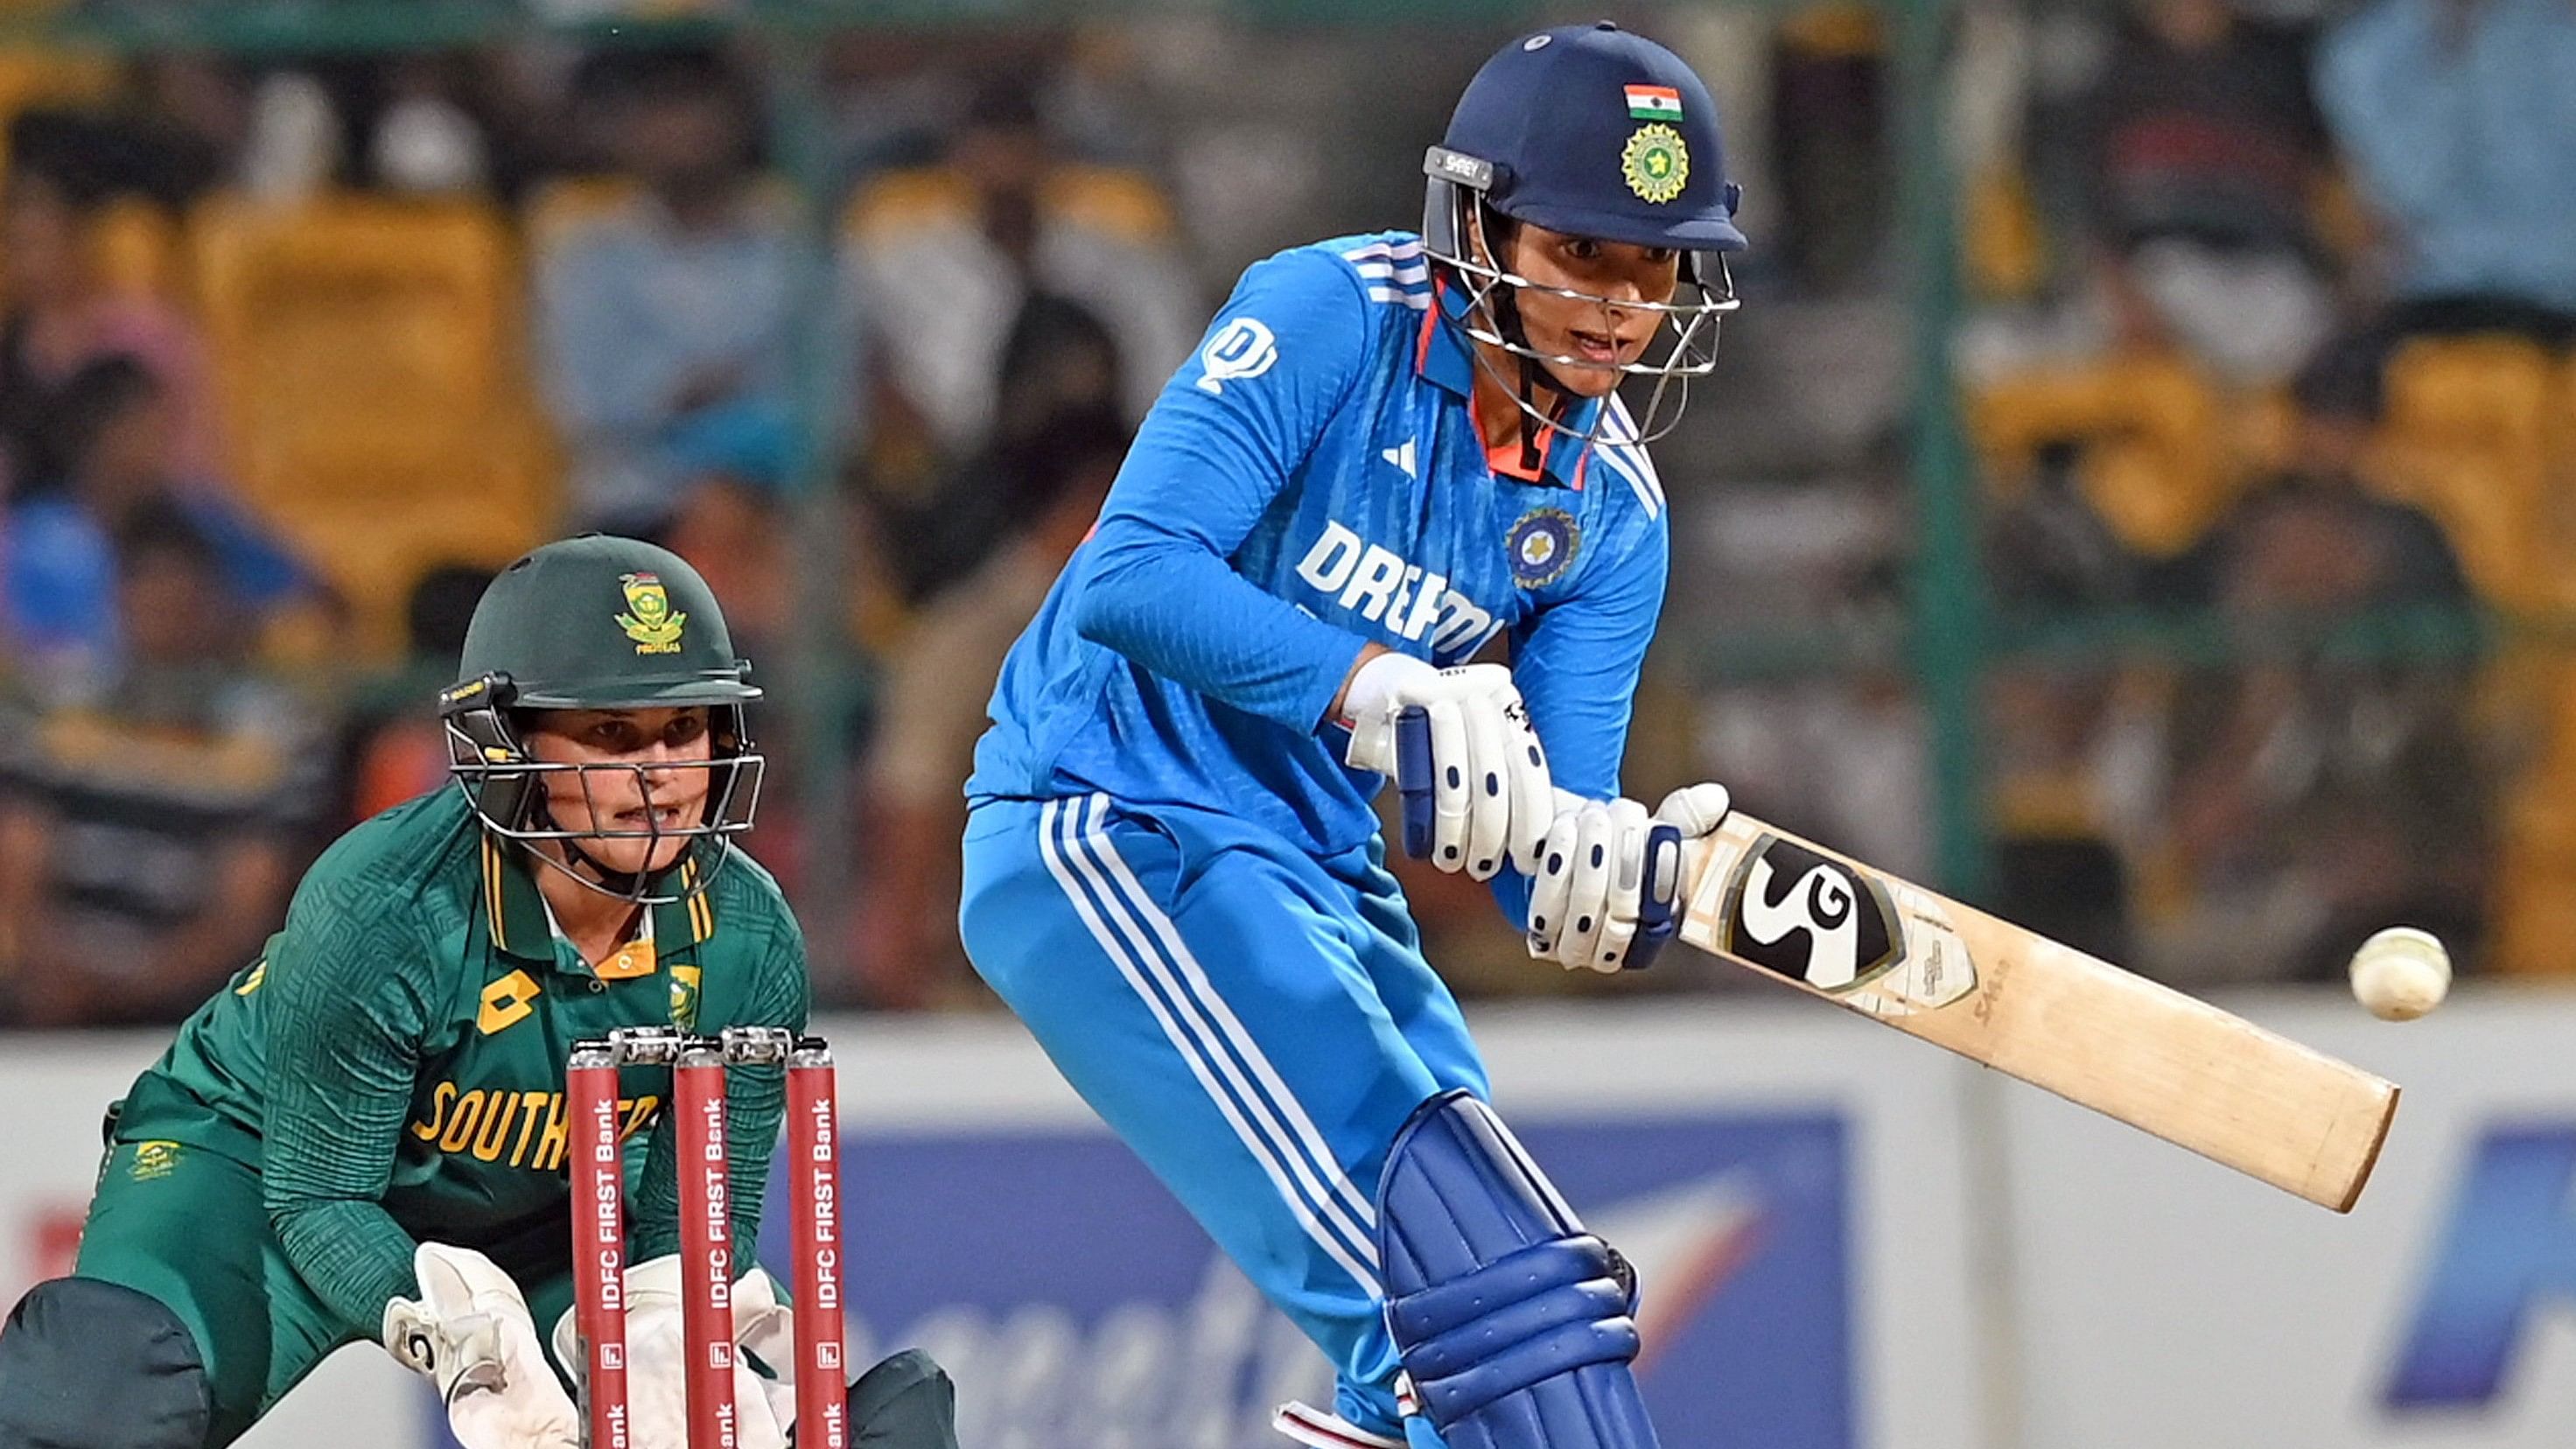 <div class="paragraphs"><p>India's Smriti Mandhana in action against South Africa's during their 3rd ODI at M Chinnaswamy Stadium in Bengaluru on Sunday. </p></div>